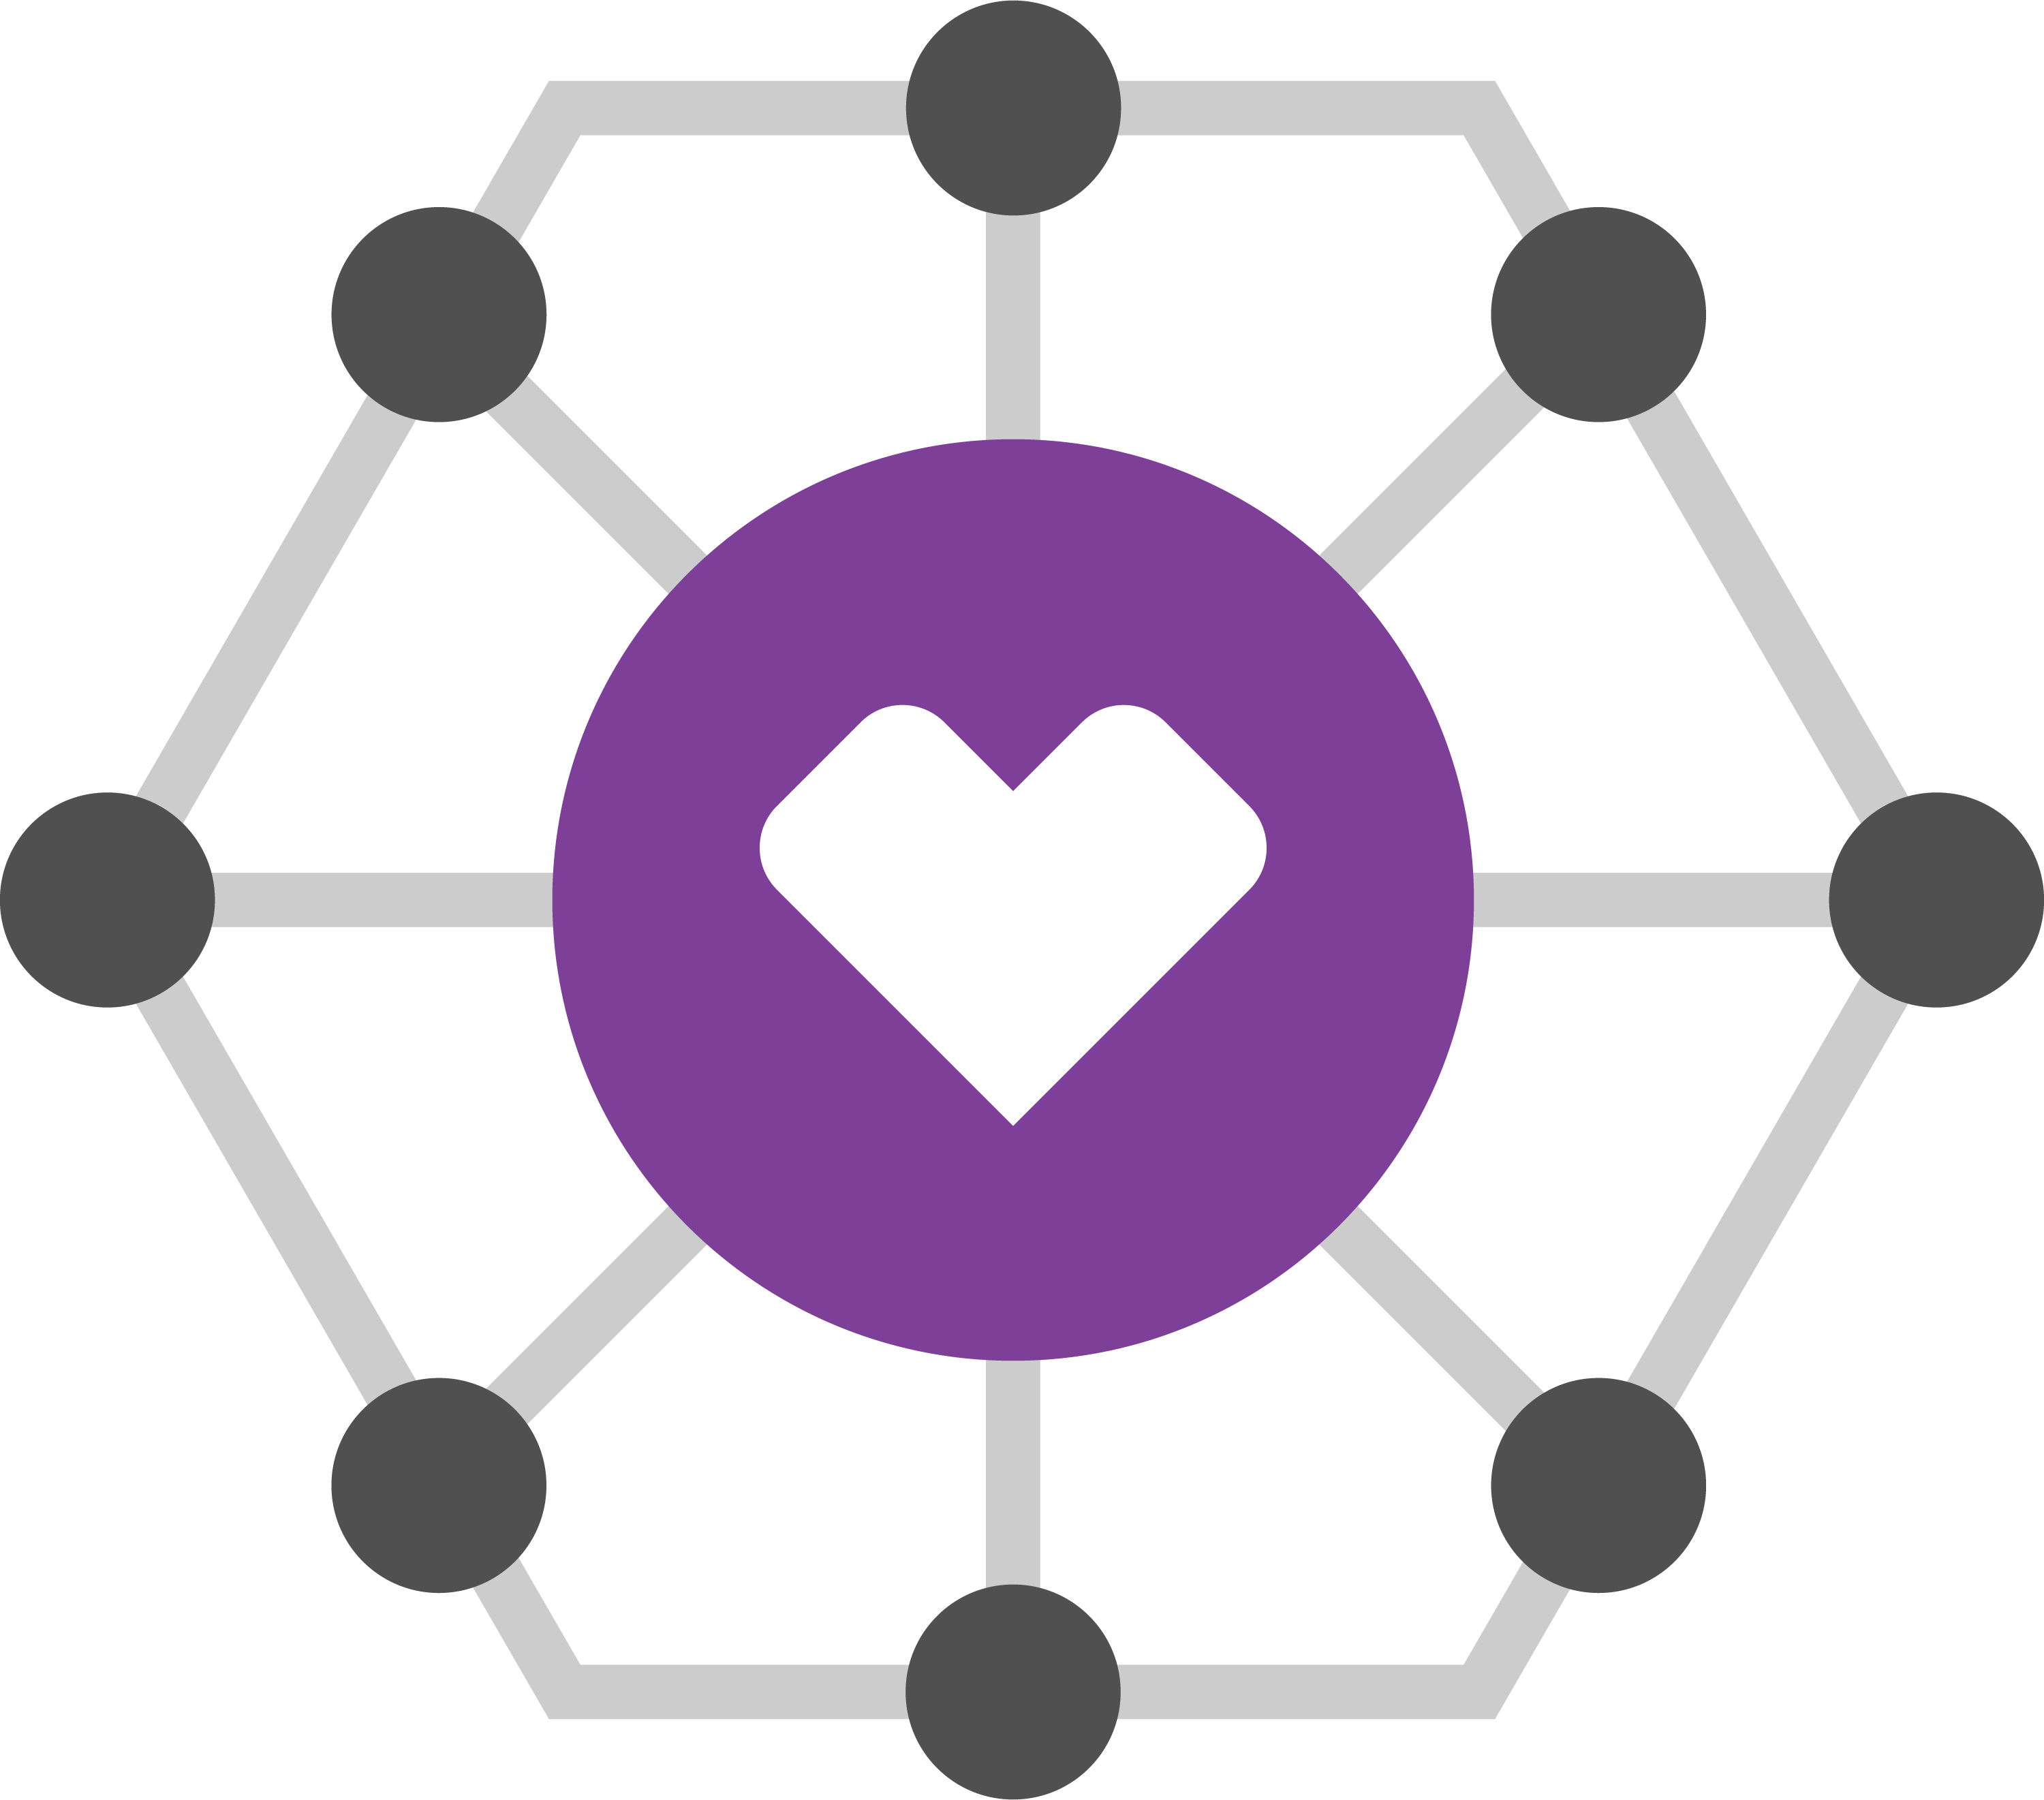 Aetna connectivity pictogram